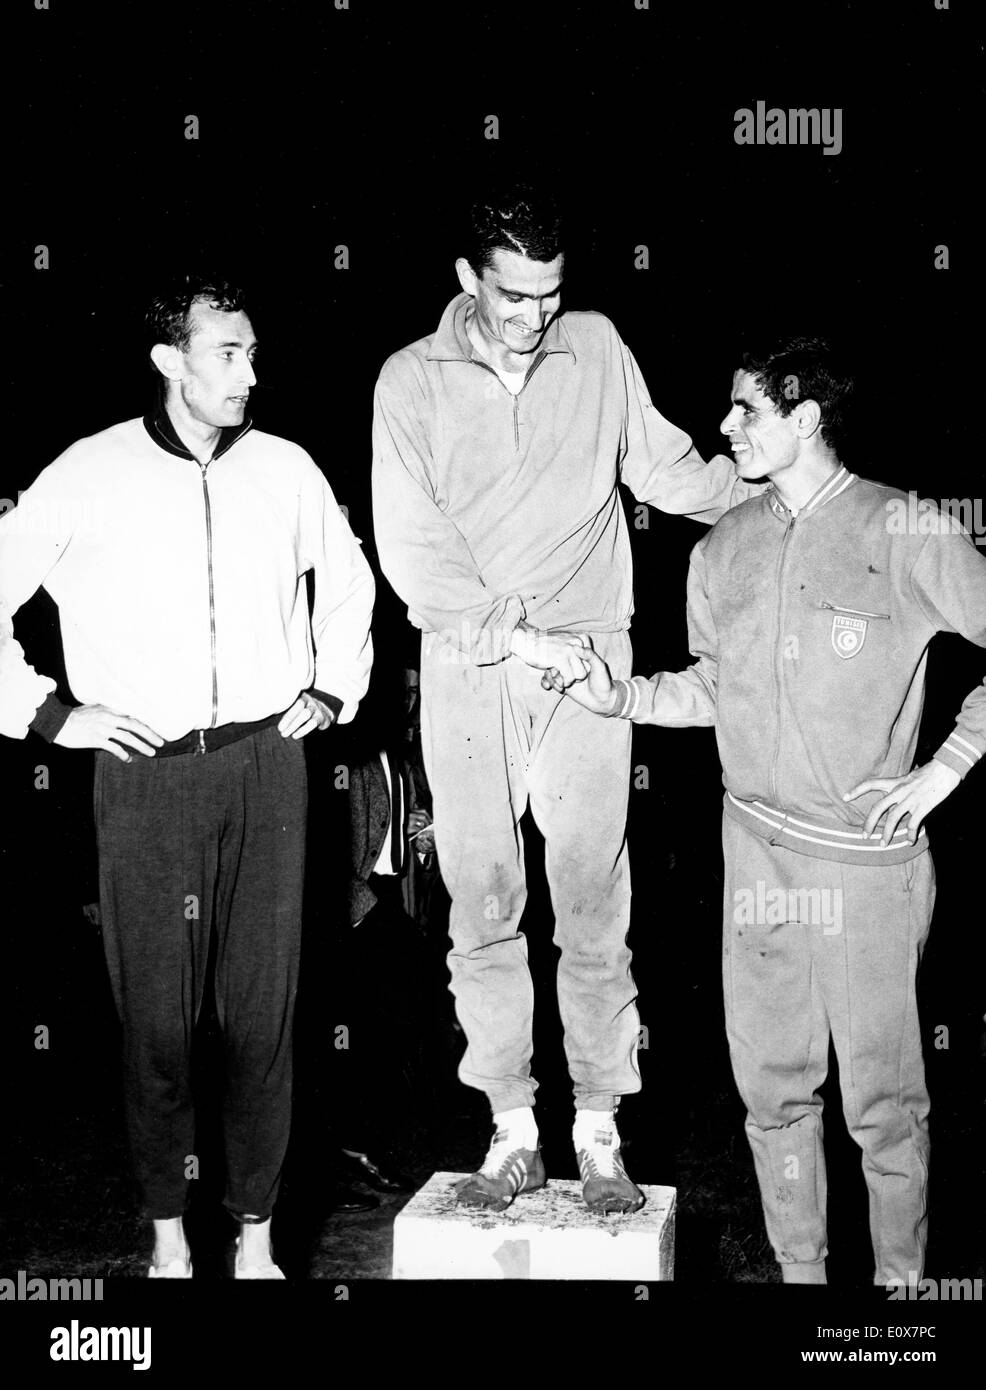 RON CLARKE, center, after winning a 5000m race at Charltey Stadium. Stock Photo